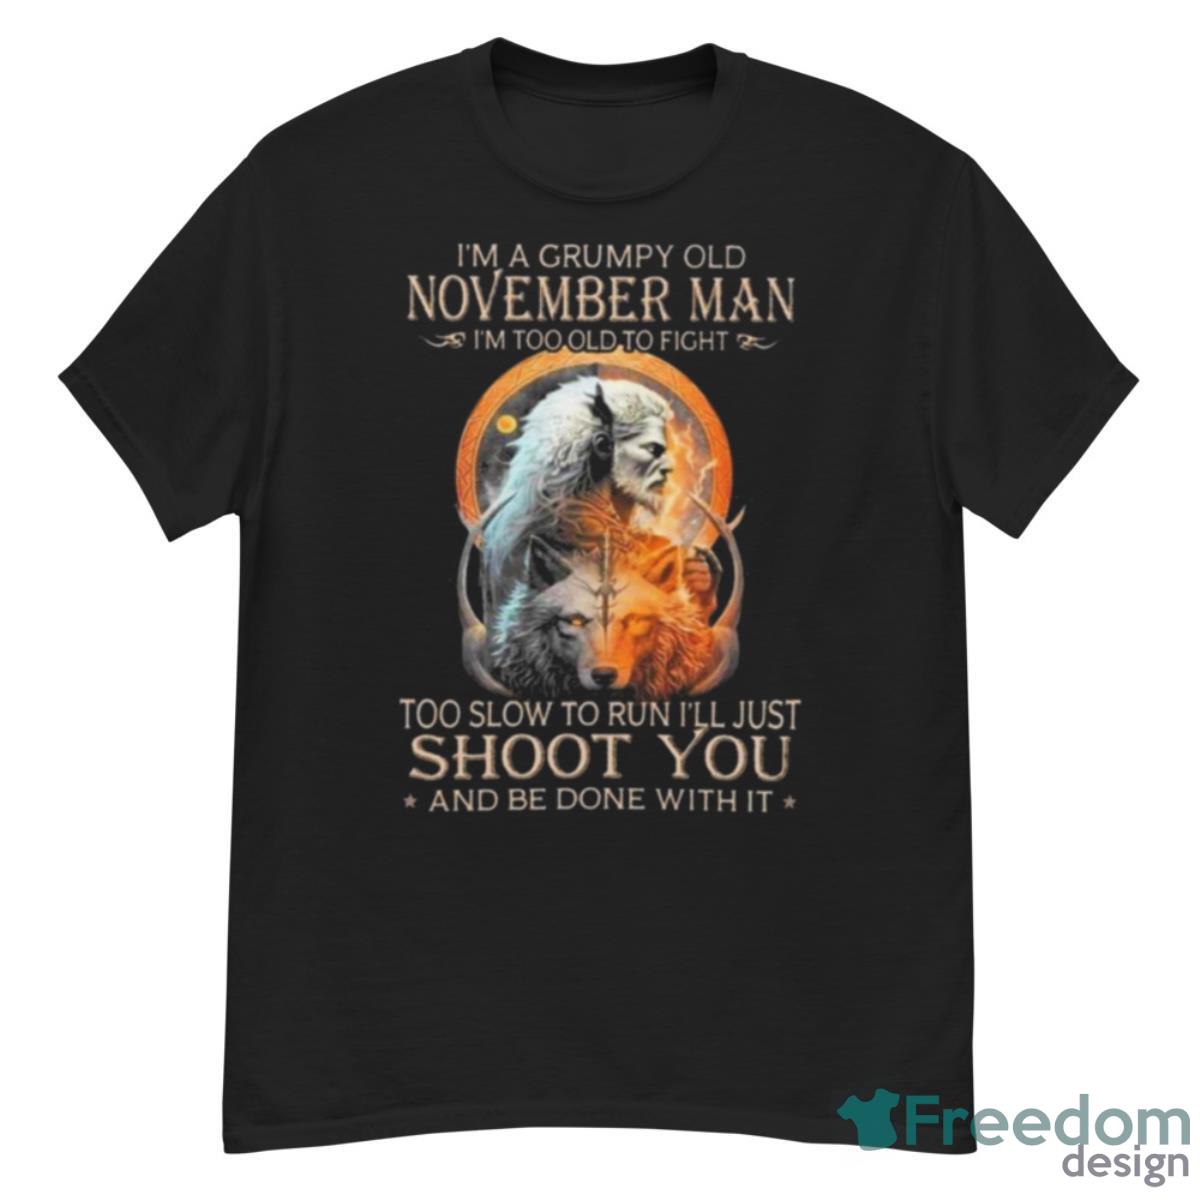 King Wolf I’m A Grumpy Old November Man I’m Too Old To Fight Too Slow To Run I’ll Just Shoot You And Be Done With It Shirt - G500 Men’s Classic T-Shirt